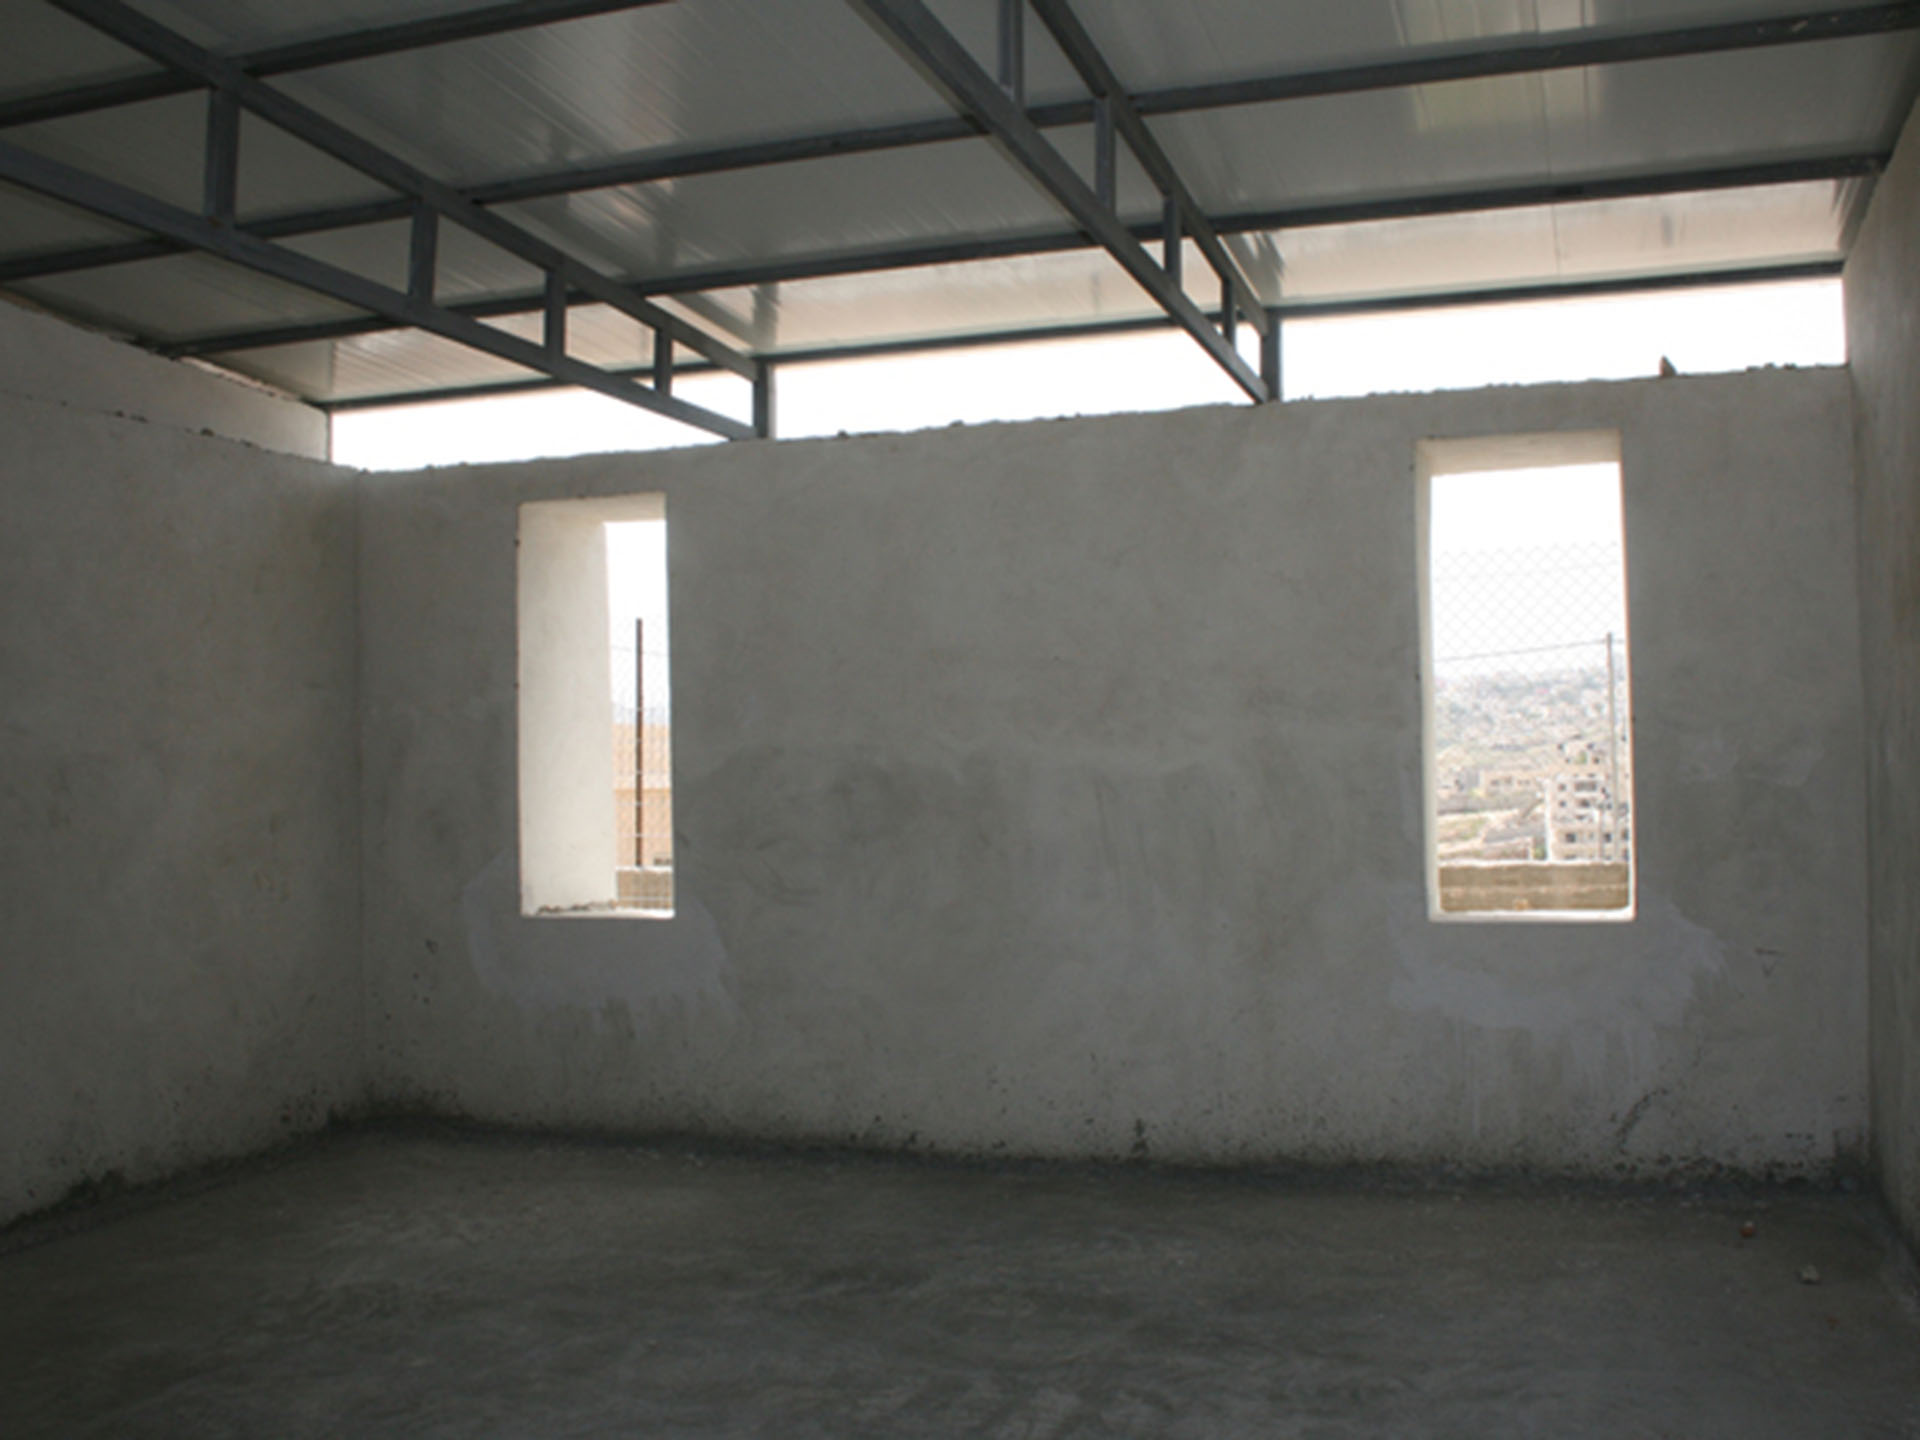 <p>This school serves 123 students of the Jahalin Bedouin community who were relocated from their villages by the Israeli Authority to this peripheral former village, cut off from East Jerusalem by the Separation Barrier.</p>